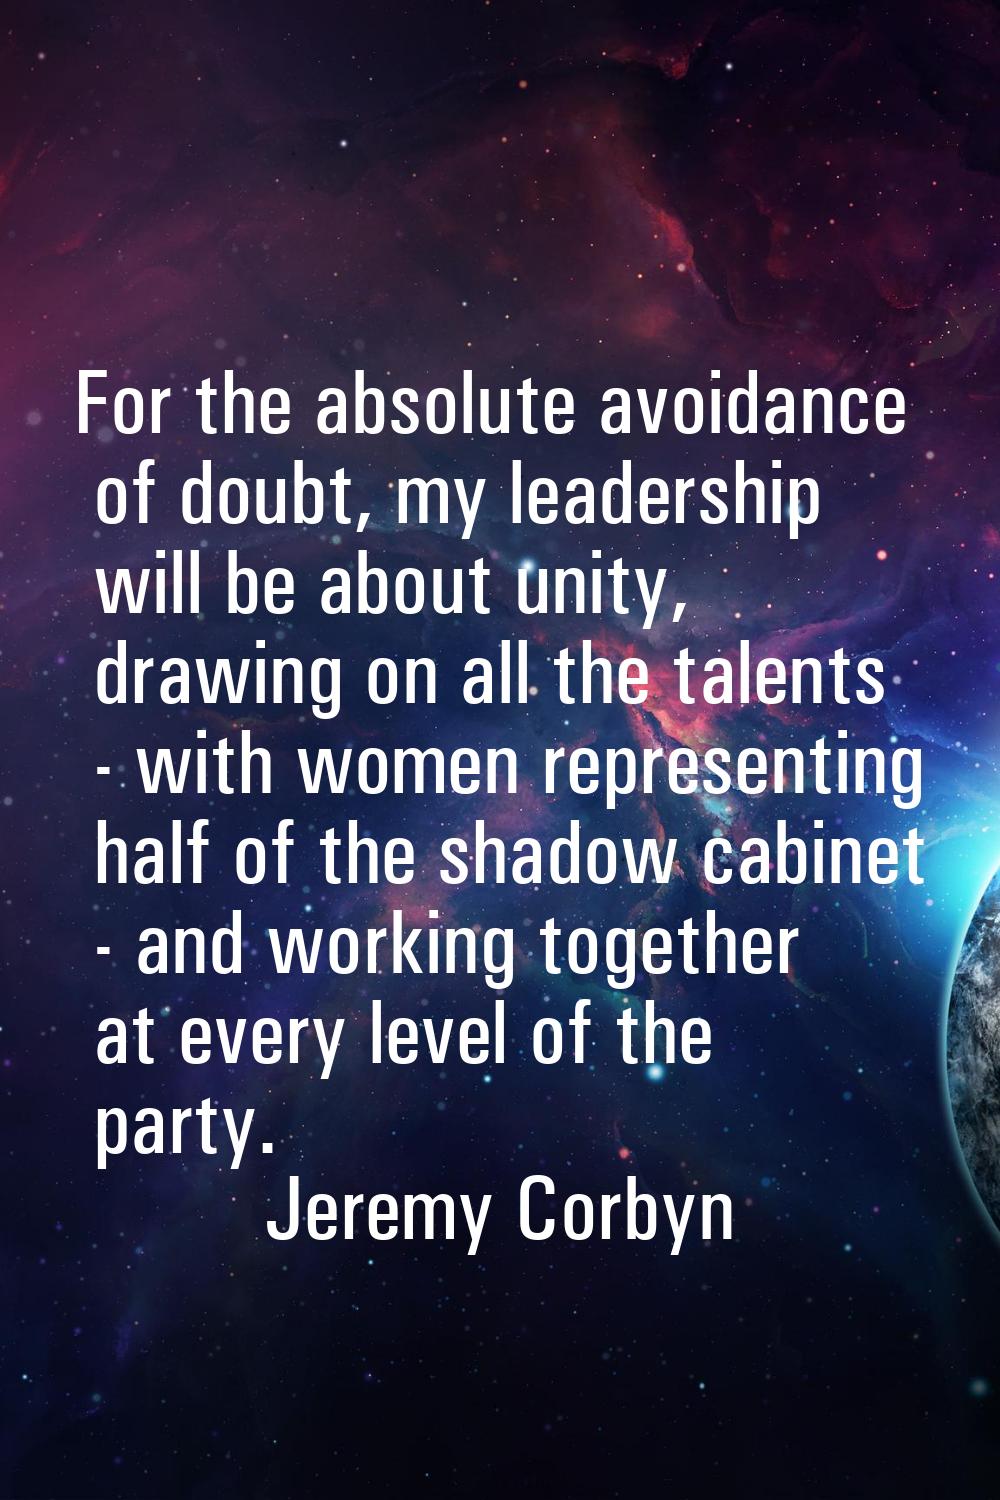 For the absolute avoidance of doubt, my leadership will be about unity, drawing on all the talents 